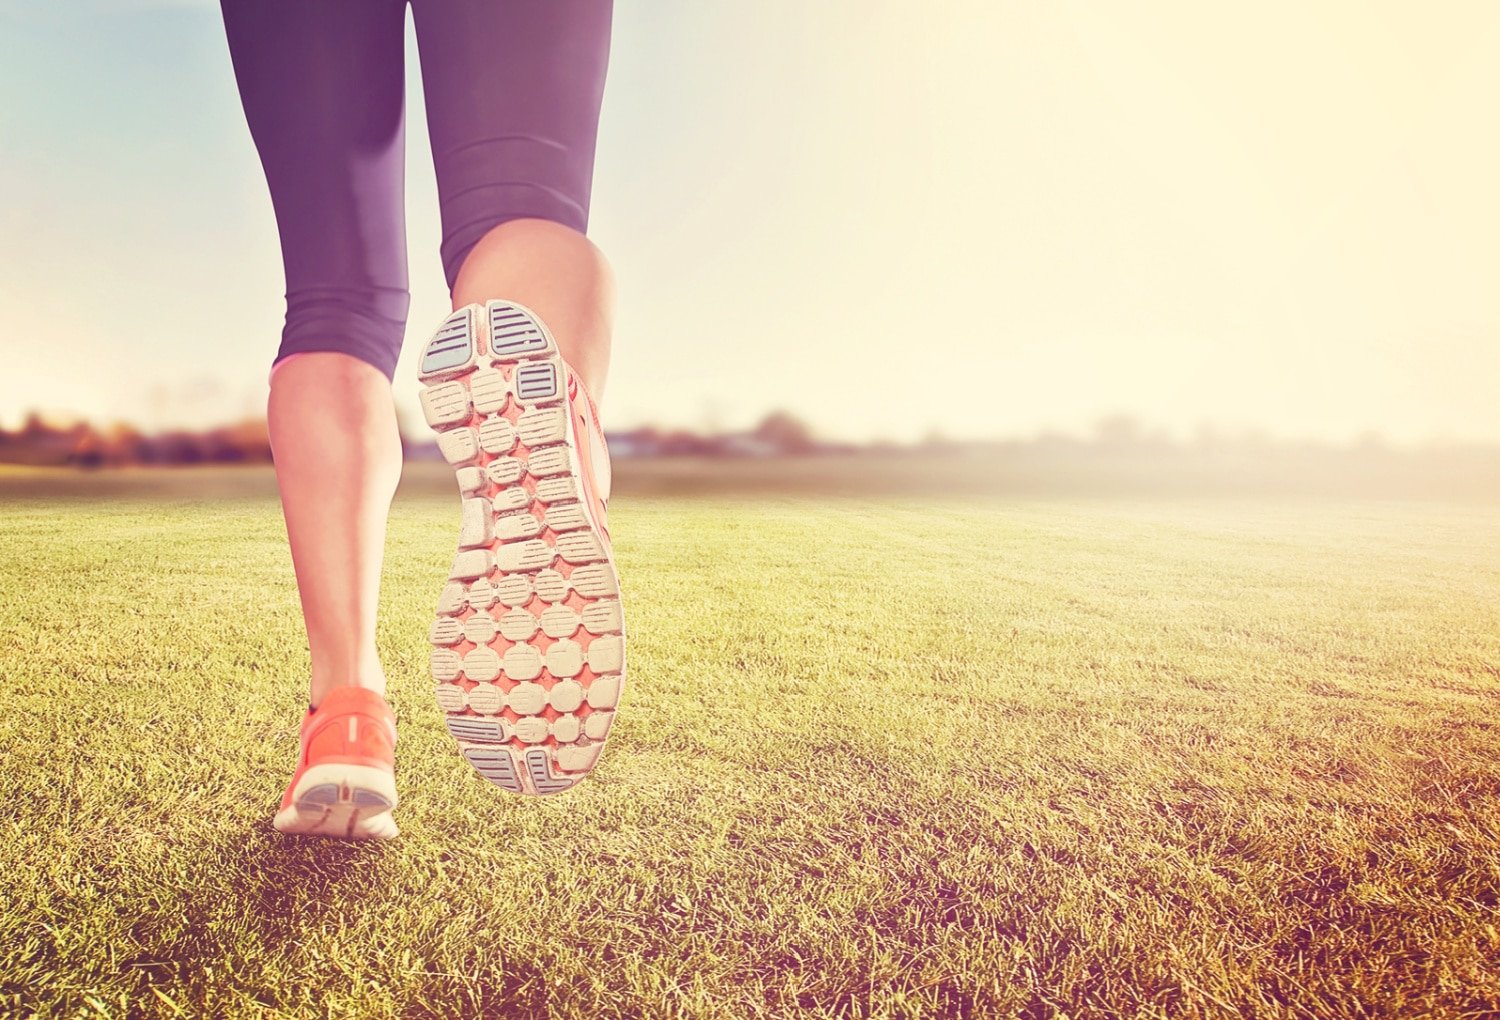 an athletic pair of legs on grass during sunrise or sunset - healthy lifestyle concept